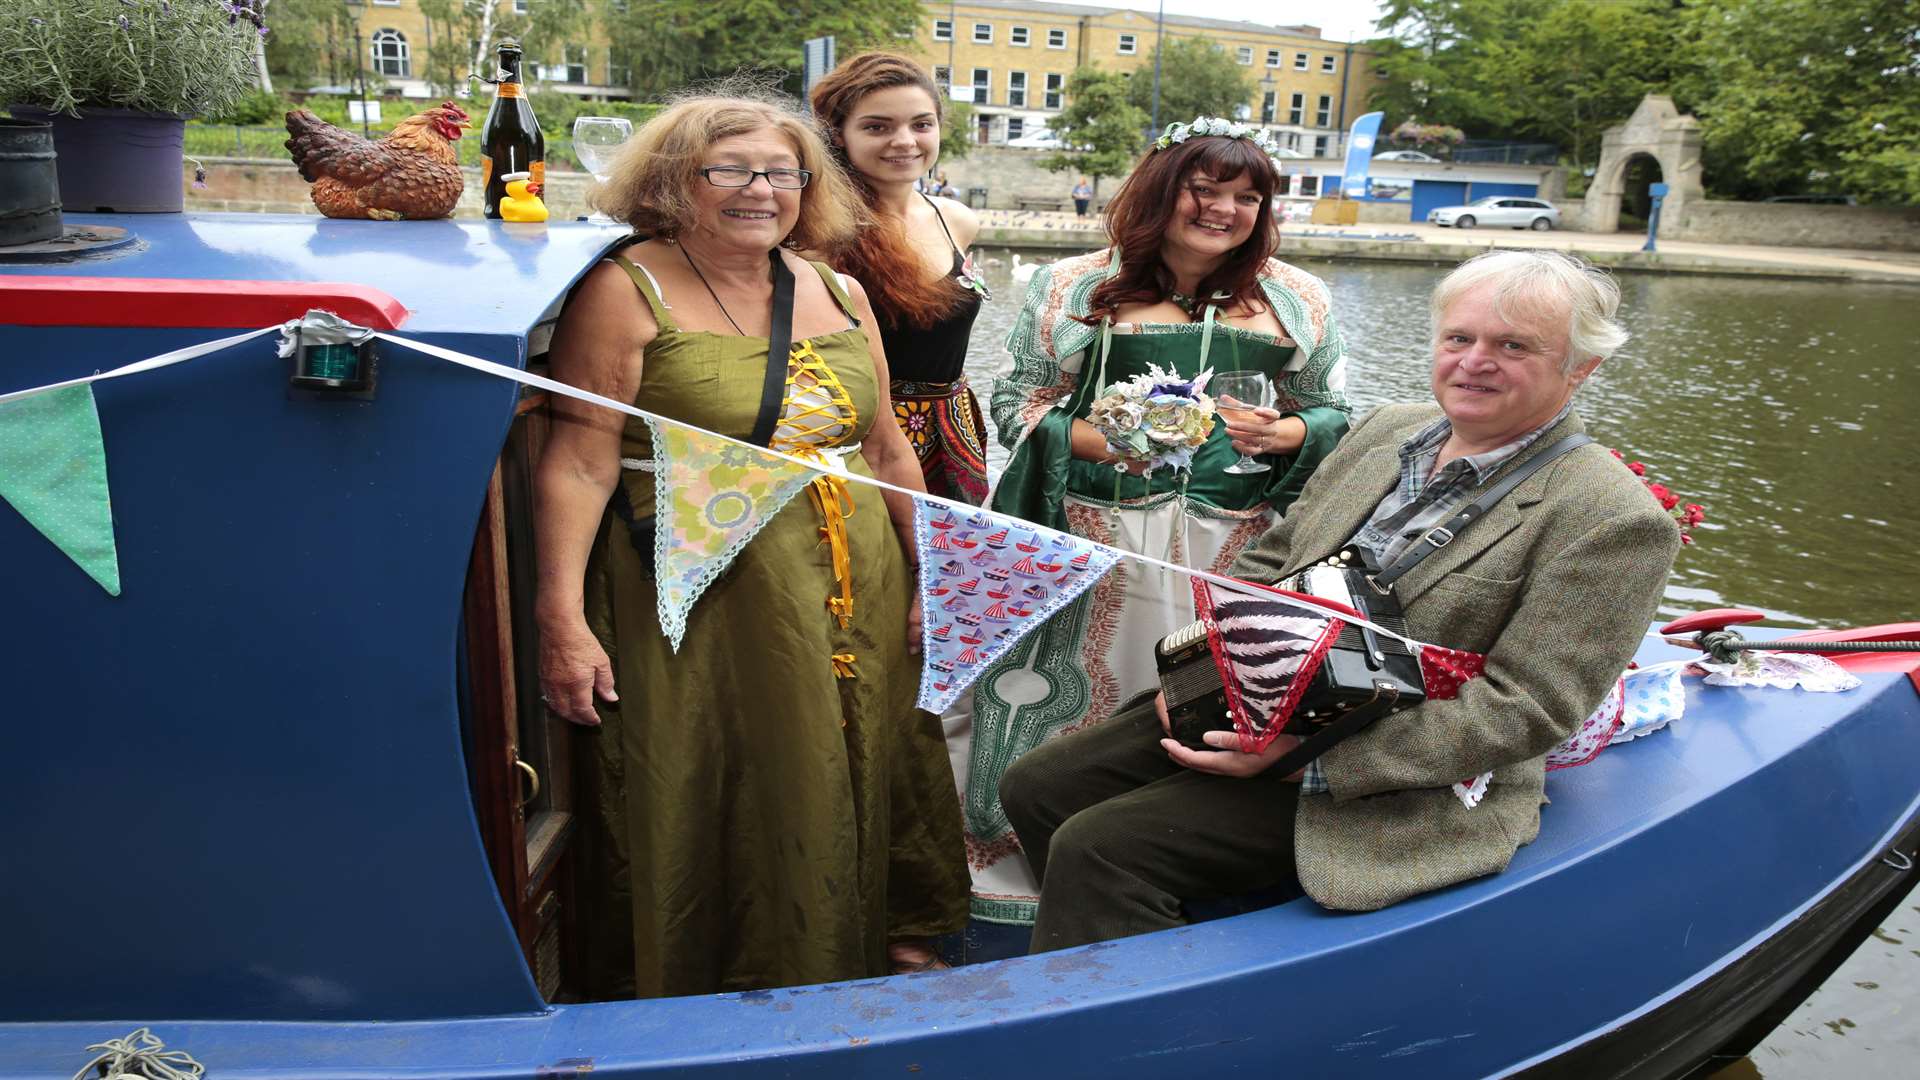 The pair got married on a flotilla of narrow boats